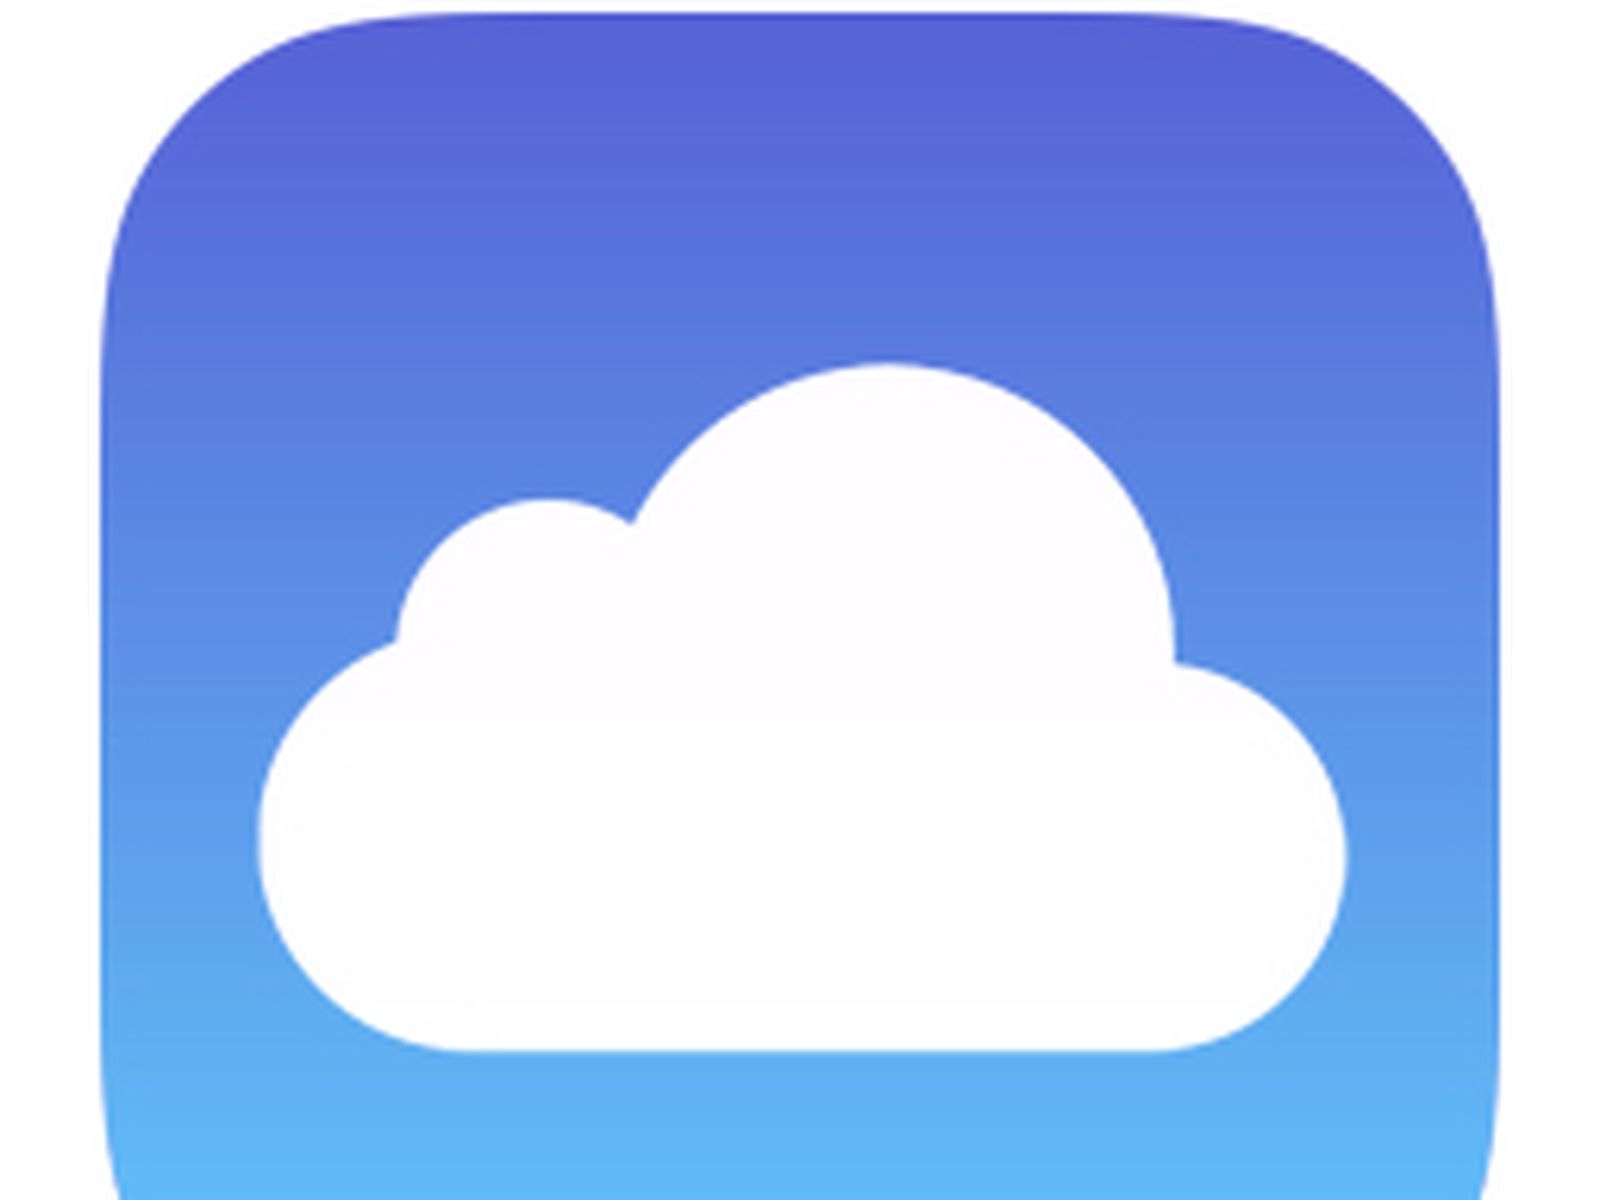 Leak torrent icloud The only